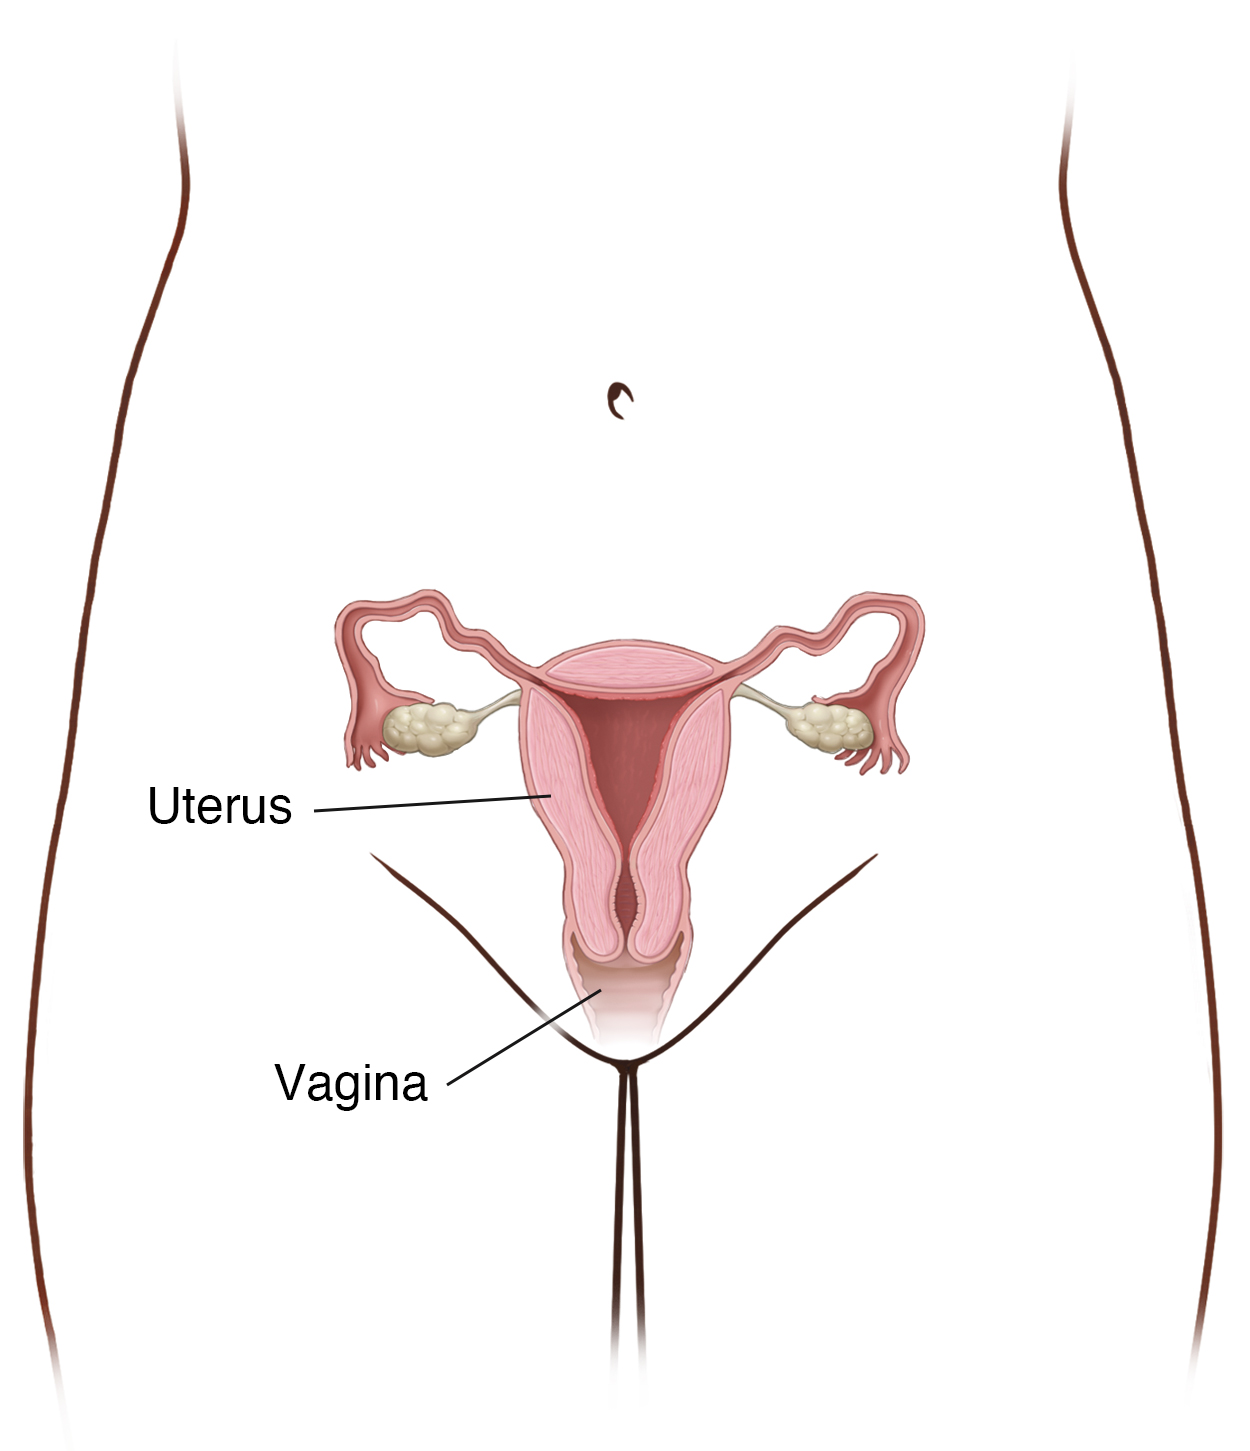 Front view of woman's pelvis showing cross section of uterus and vagina.